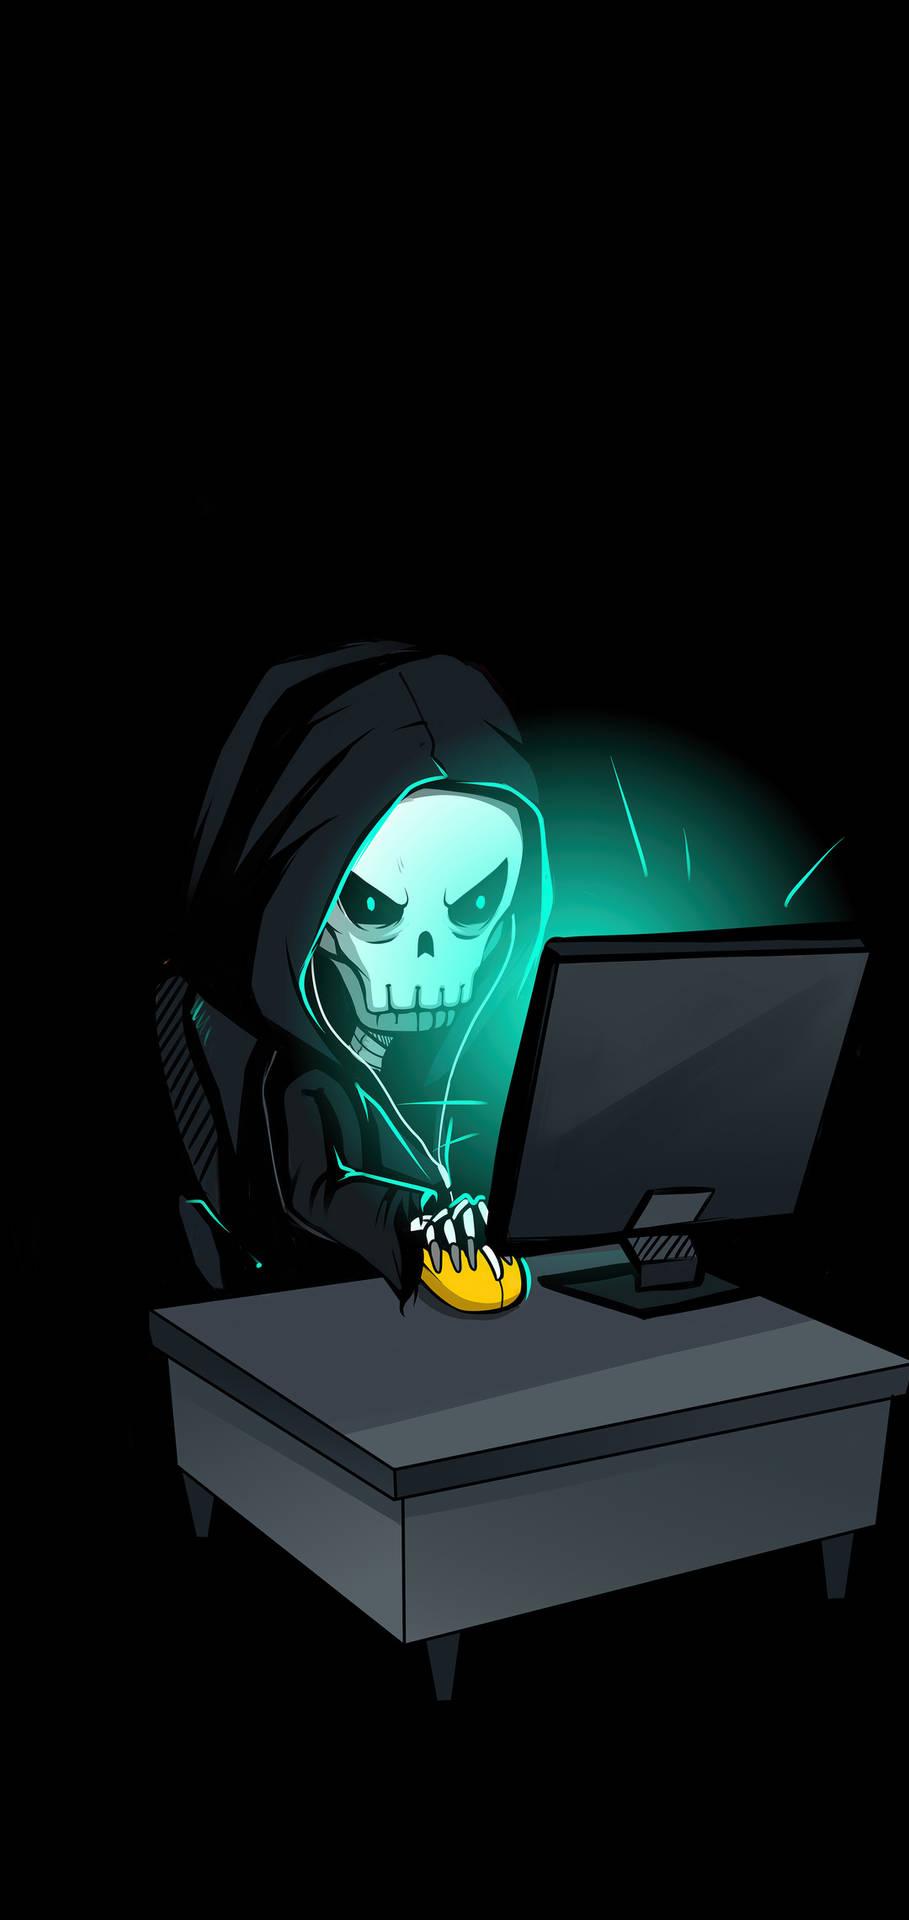 Graphic Skull With Computer Hacking Android Background